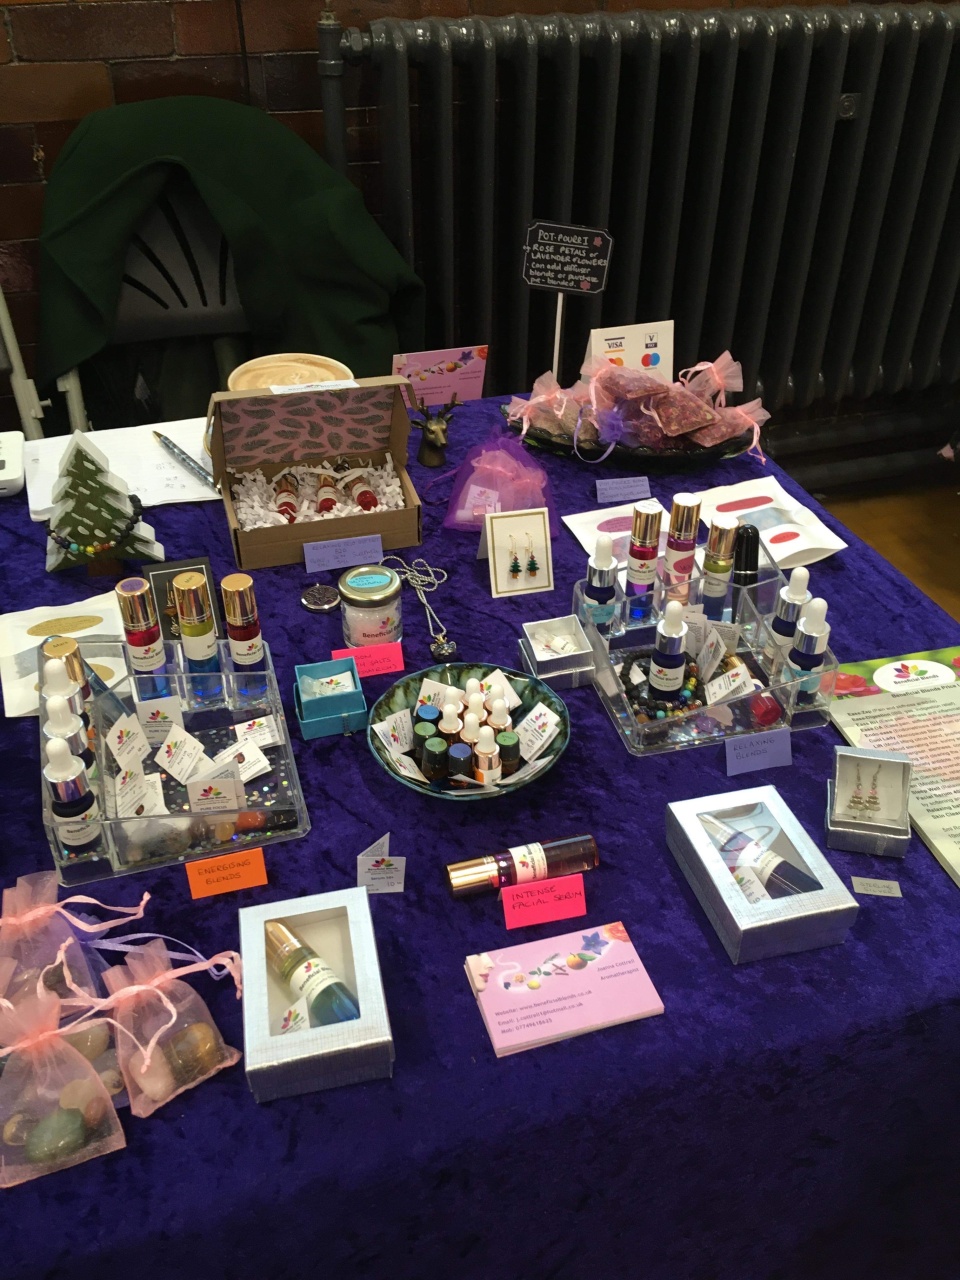 essential oils photographed being sold at a wellbeing fair, the stall has a purple clothed table, lots of different blends and also some jewellery